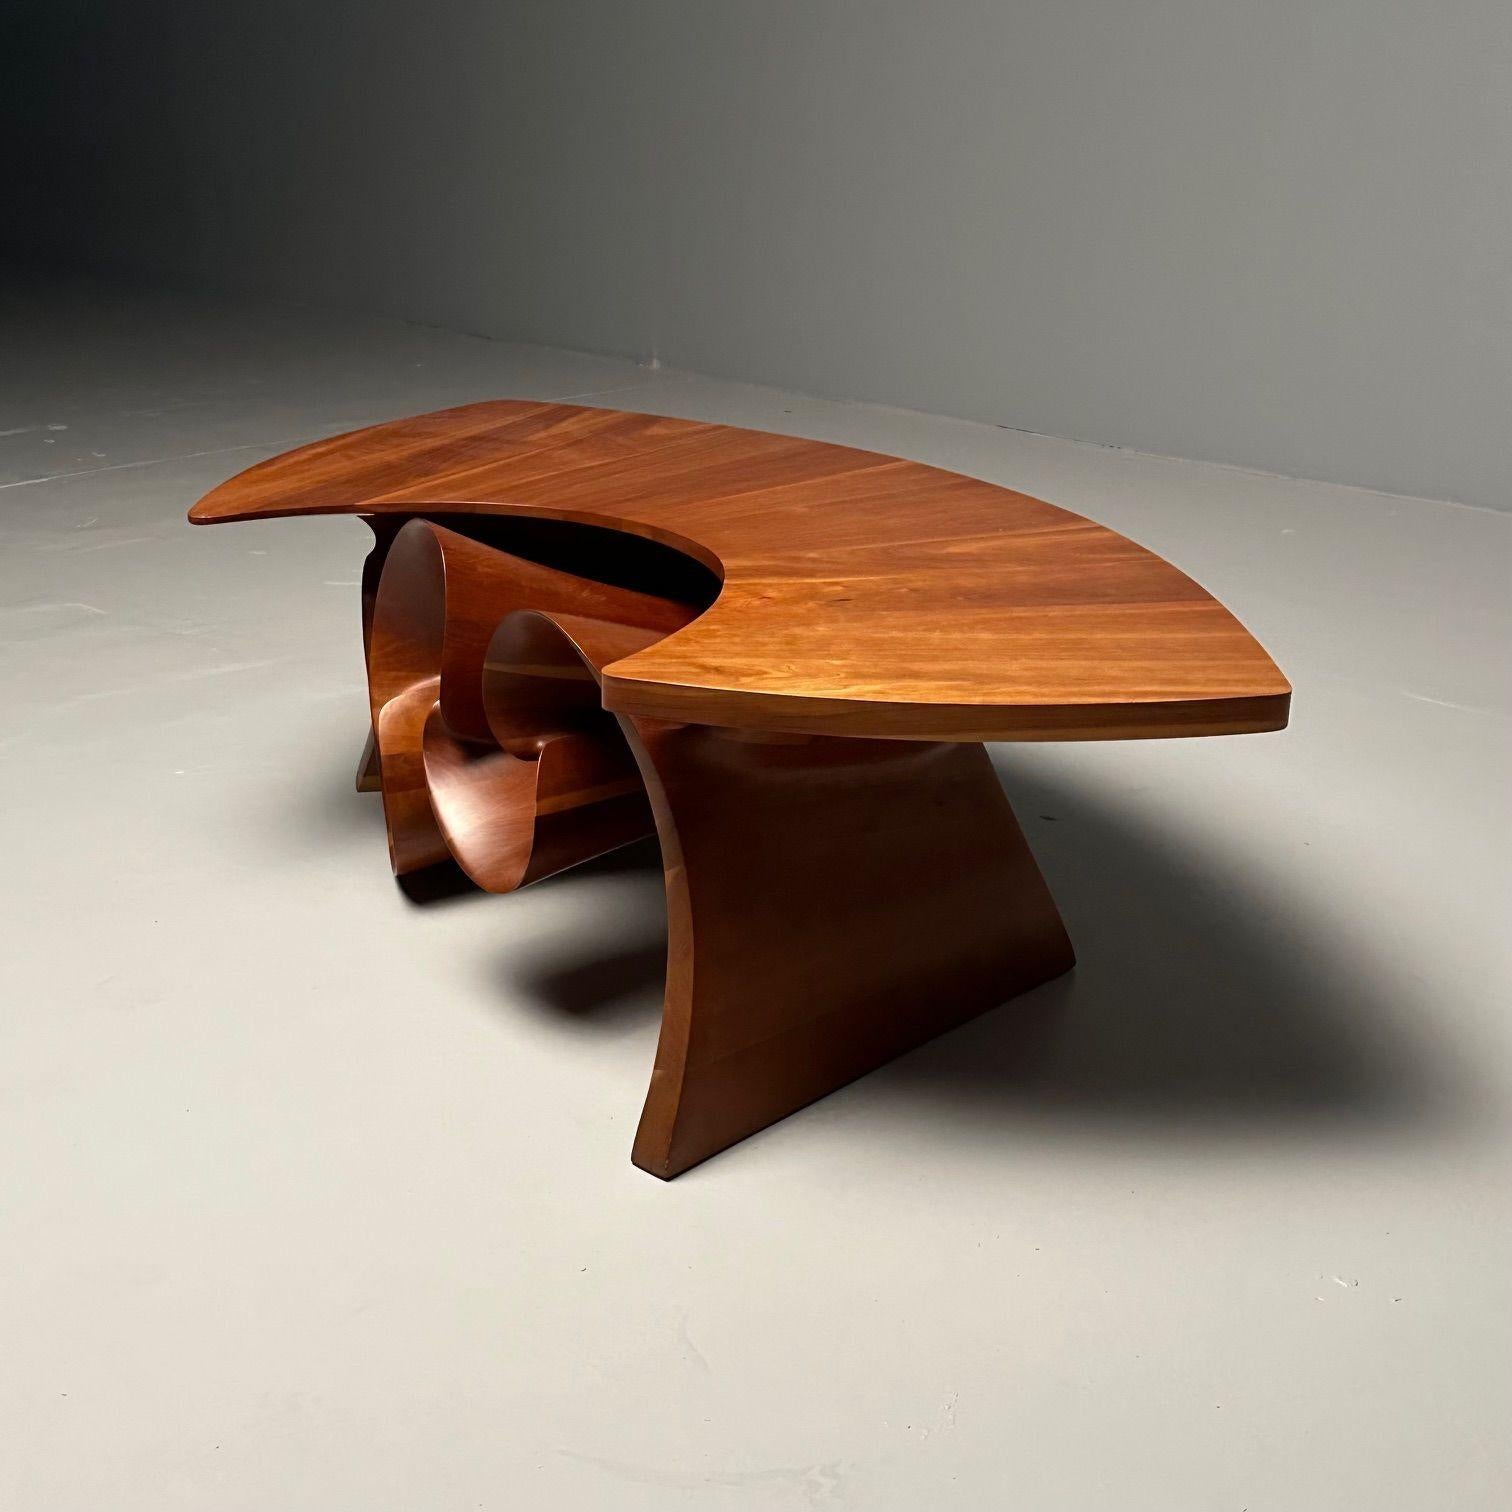 20th Century Peter Michael Adams, Mid-Century, Sculptural Coffee Table, Walnut, USA, 1970s For Sale